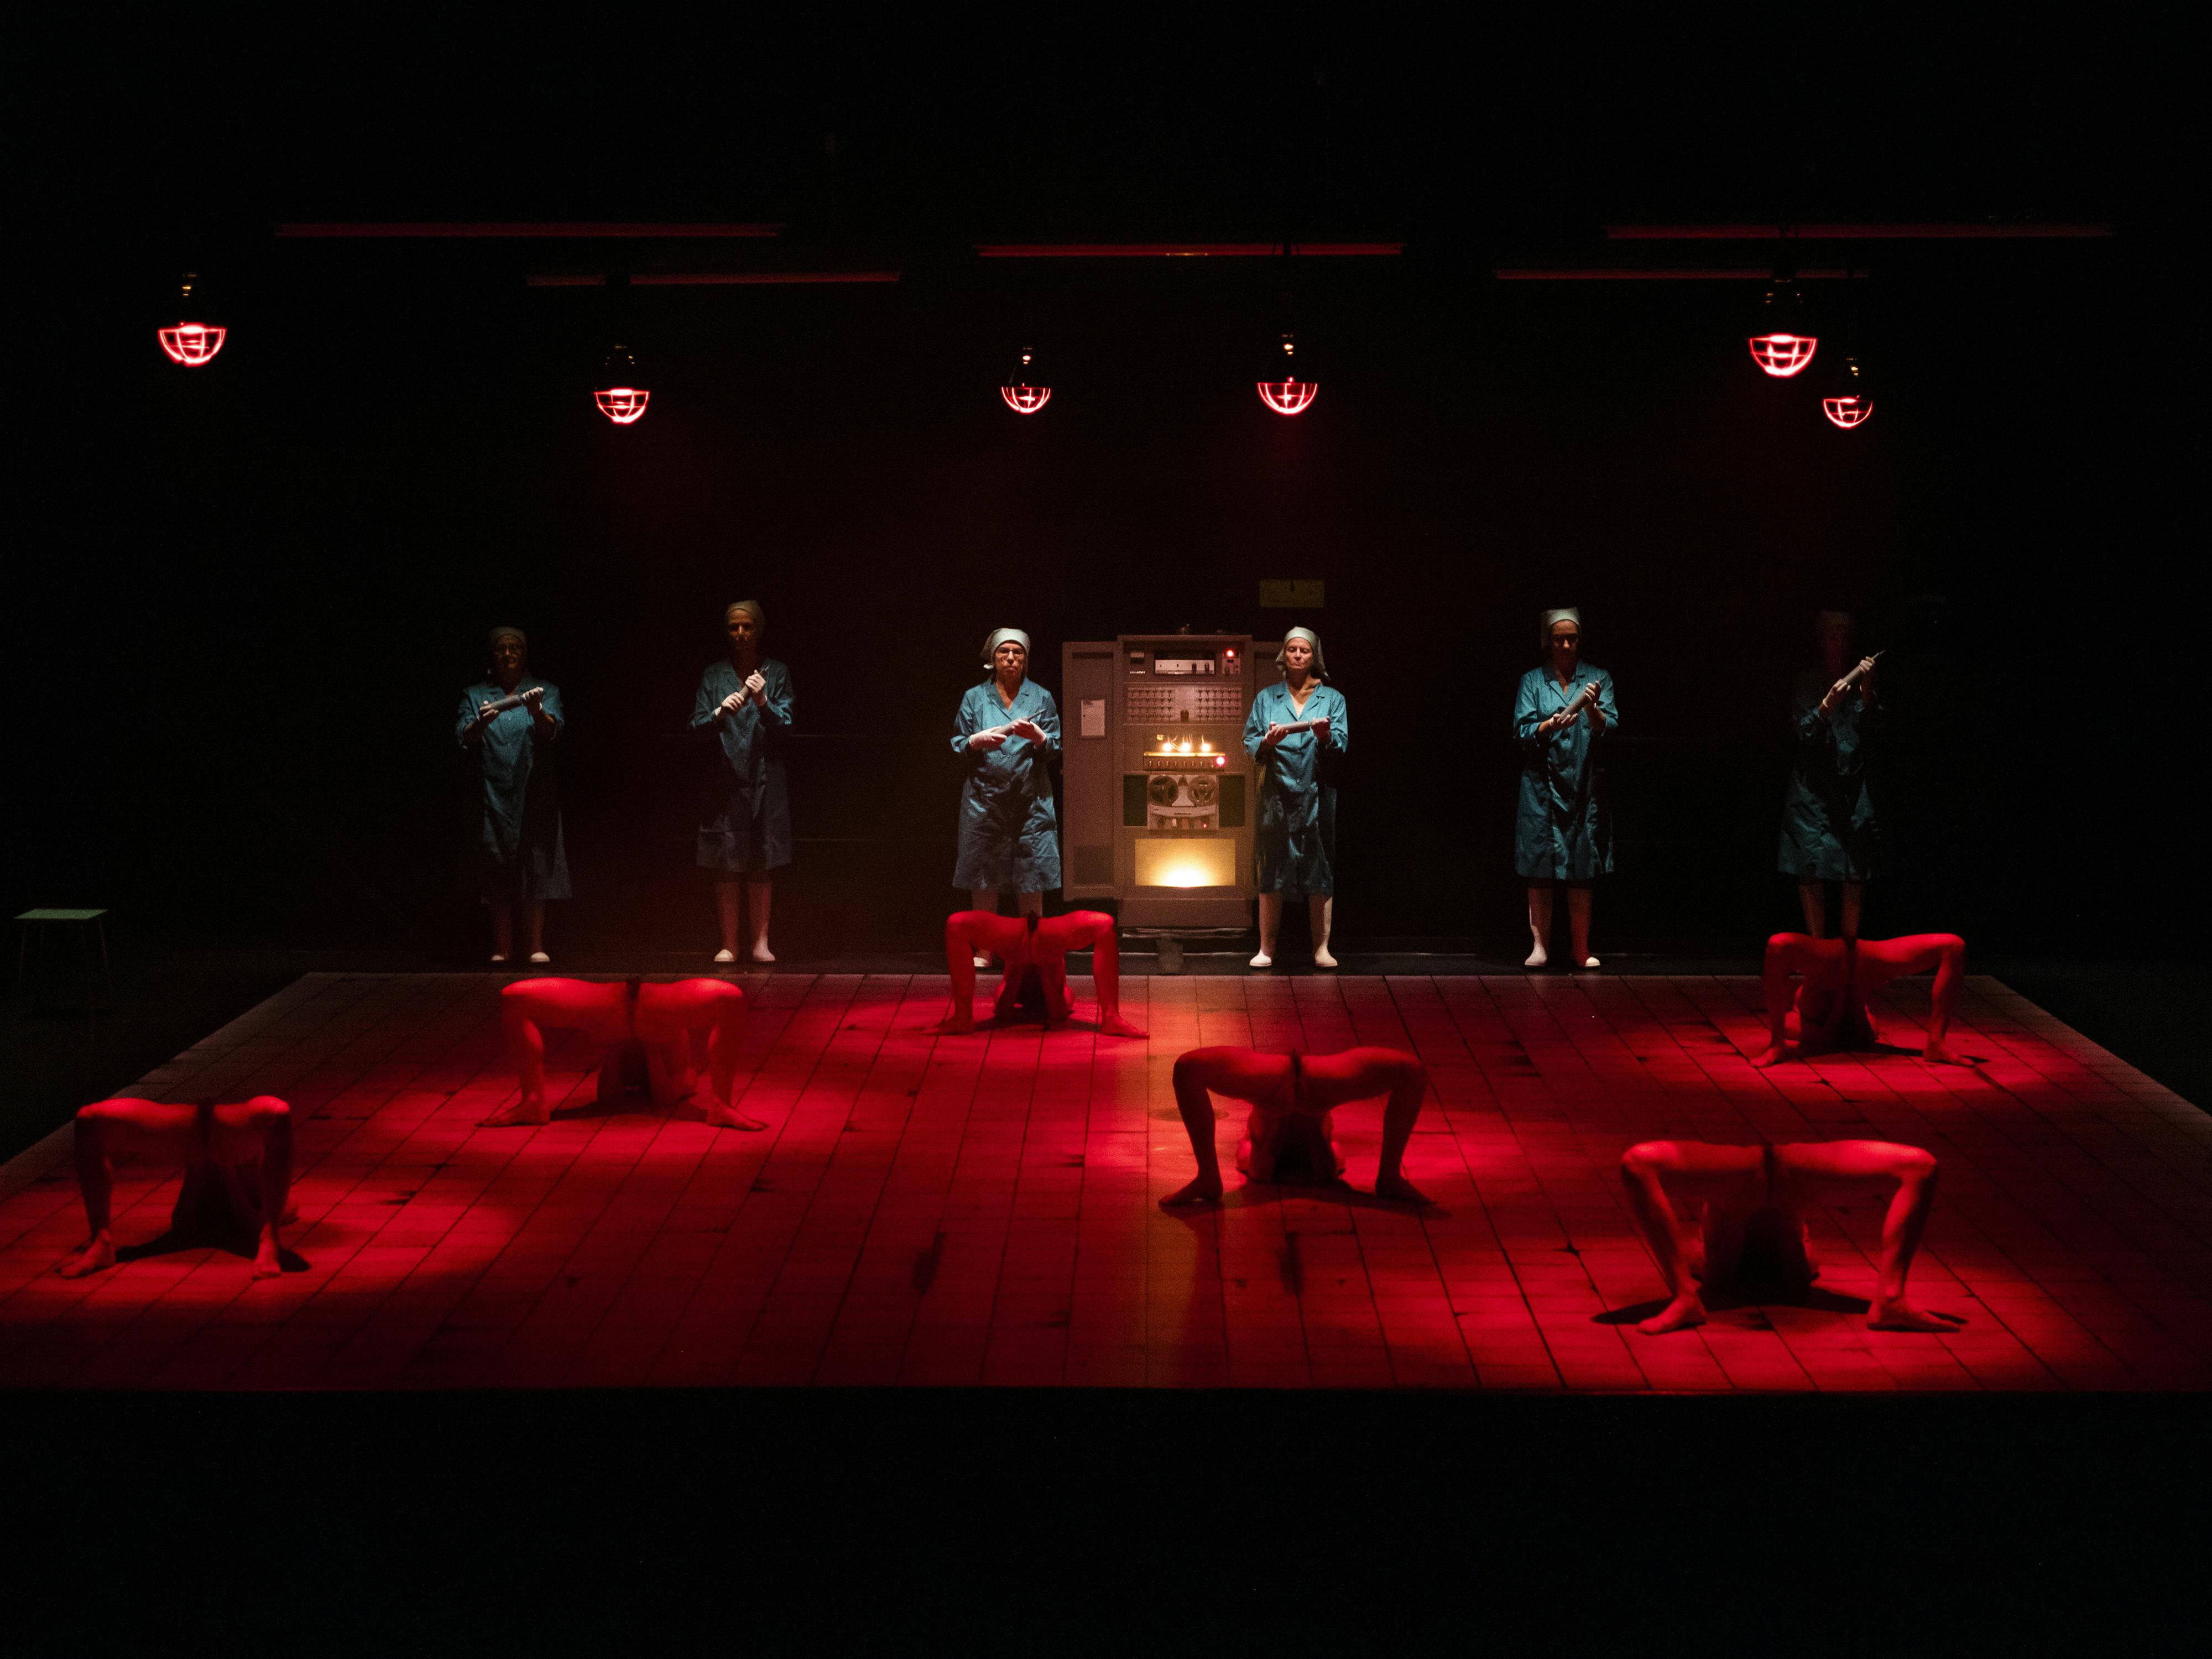 The stage is lit by a dim red light. Six women in lab coats look toward the room from the back of the stage. On the ground in front of them, six decomposed bodies lose their shapes to become something else.